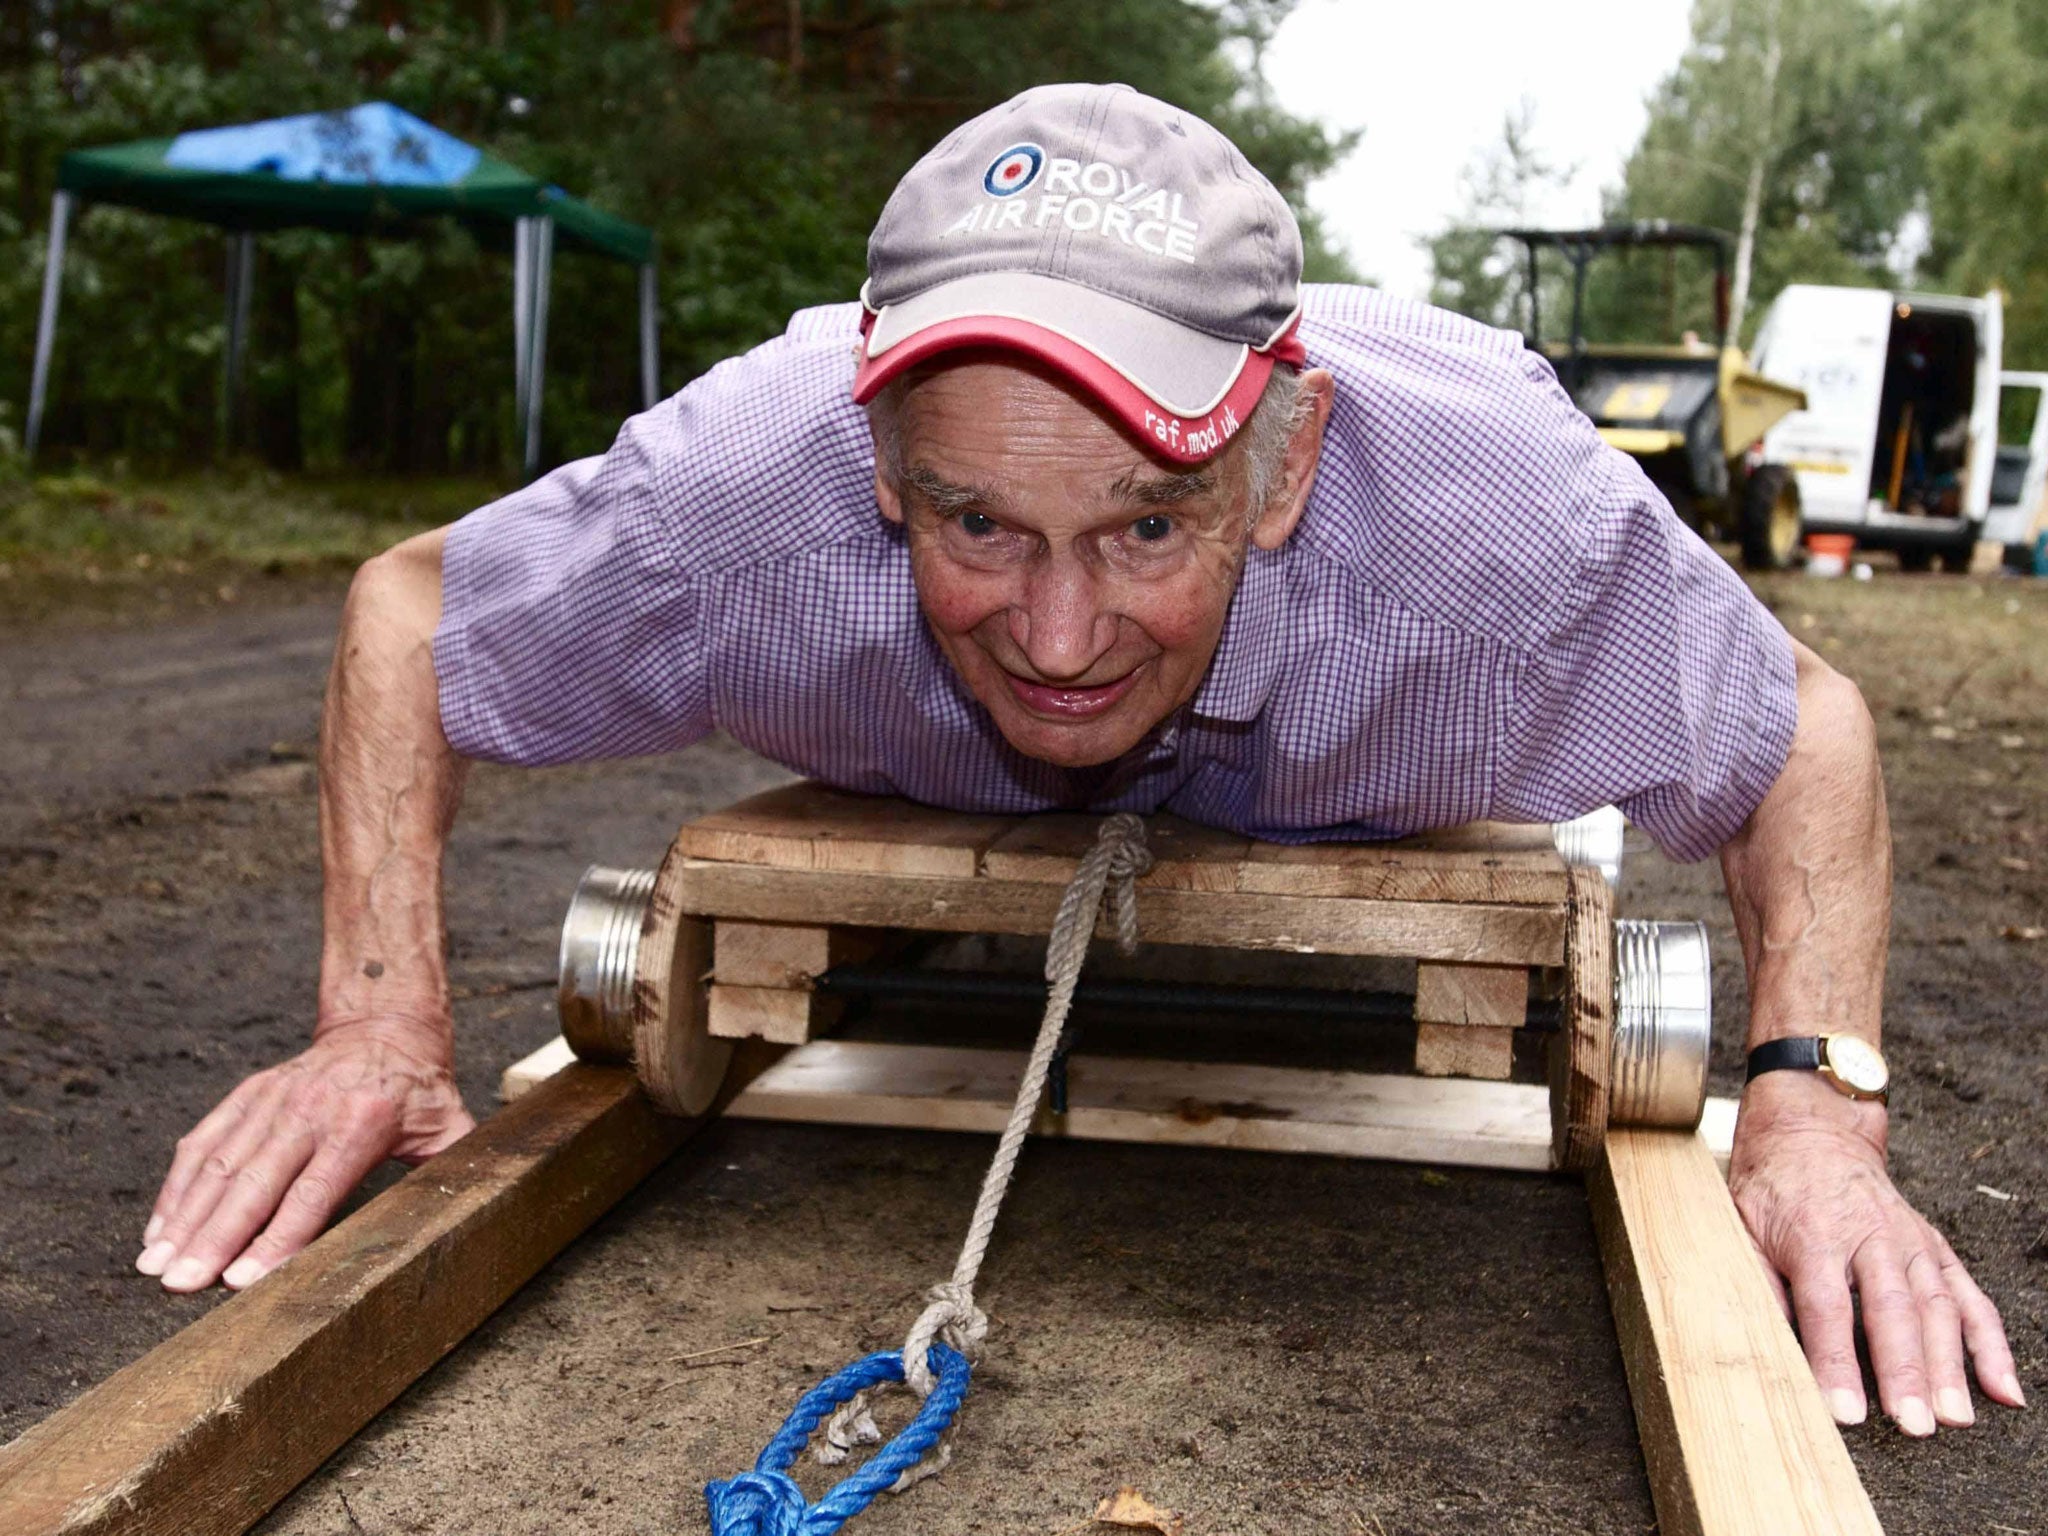 Stone demonstrates a tunnel trolley in 2011 for a television documentary